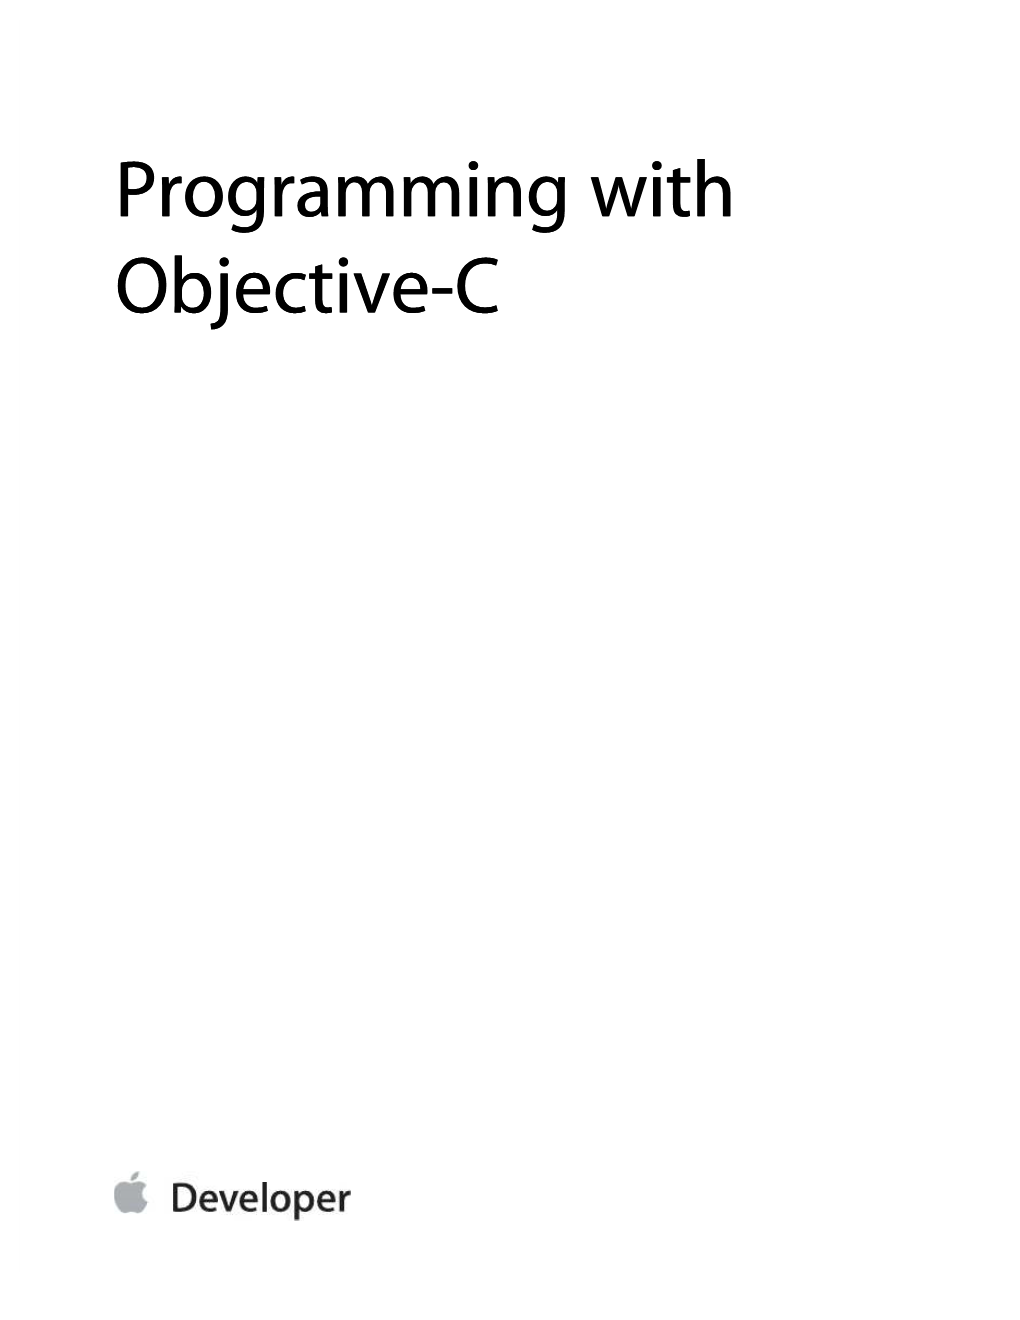 Programming with Objective-C Contents